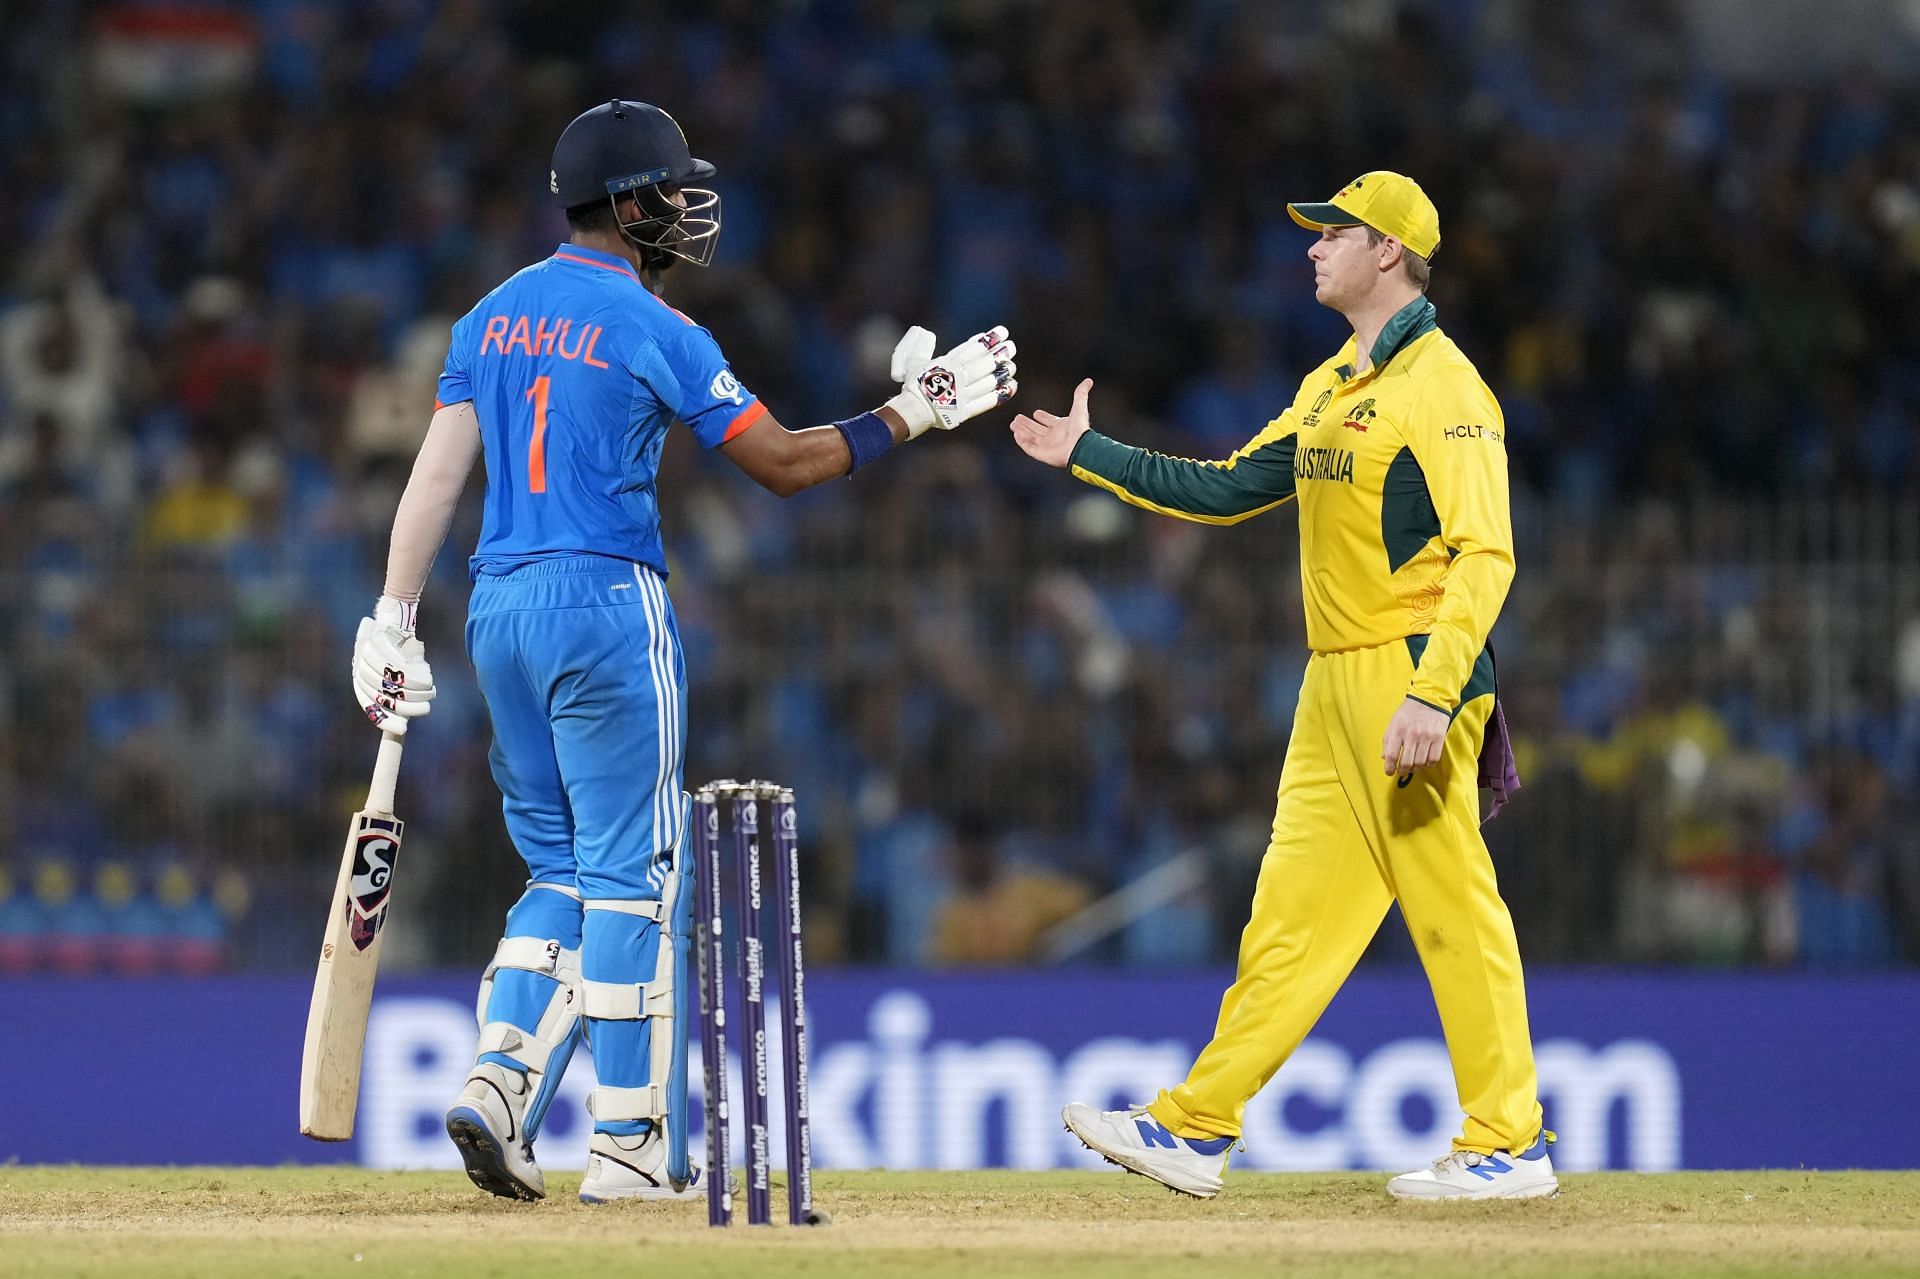 Australia were outplayed by India in their tournament opener. [P/C: AP]